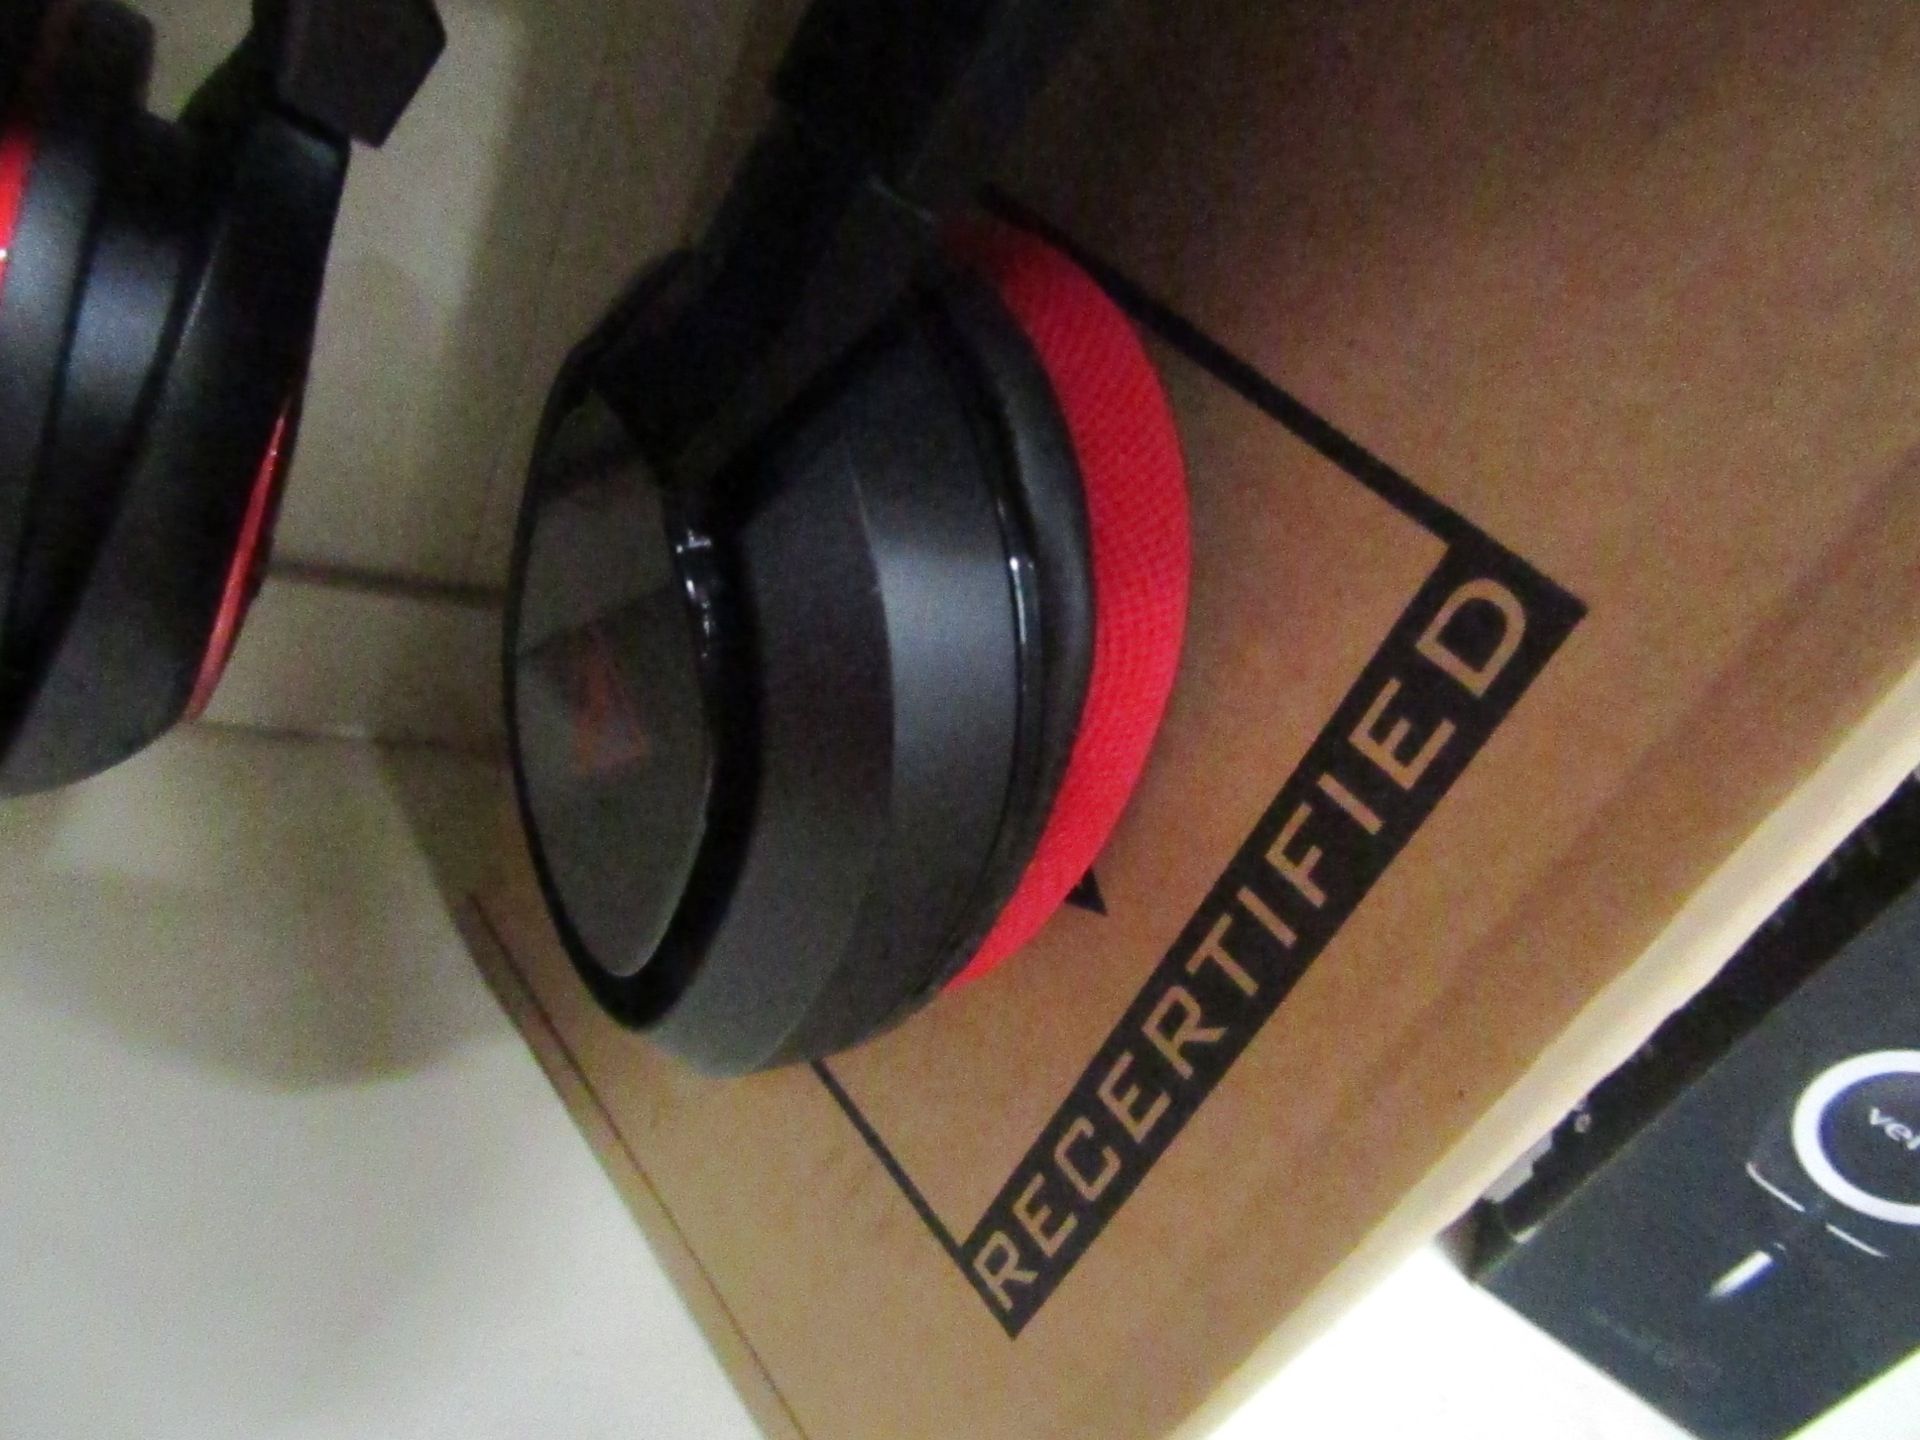 Turtle Beach 320 gaming headset,tested working and boxed.